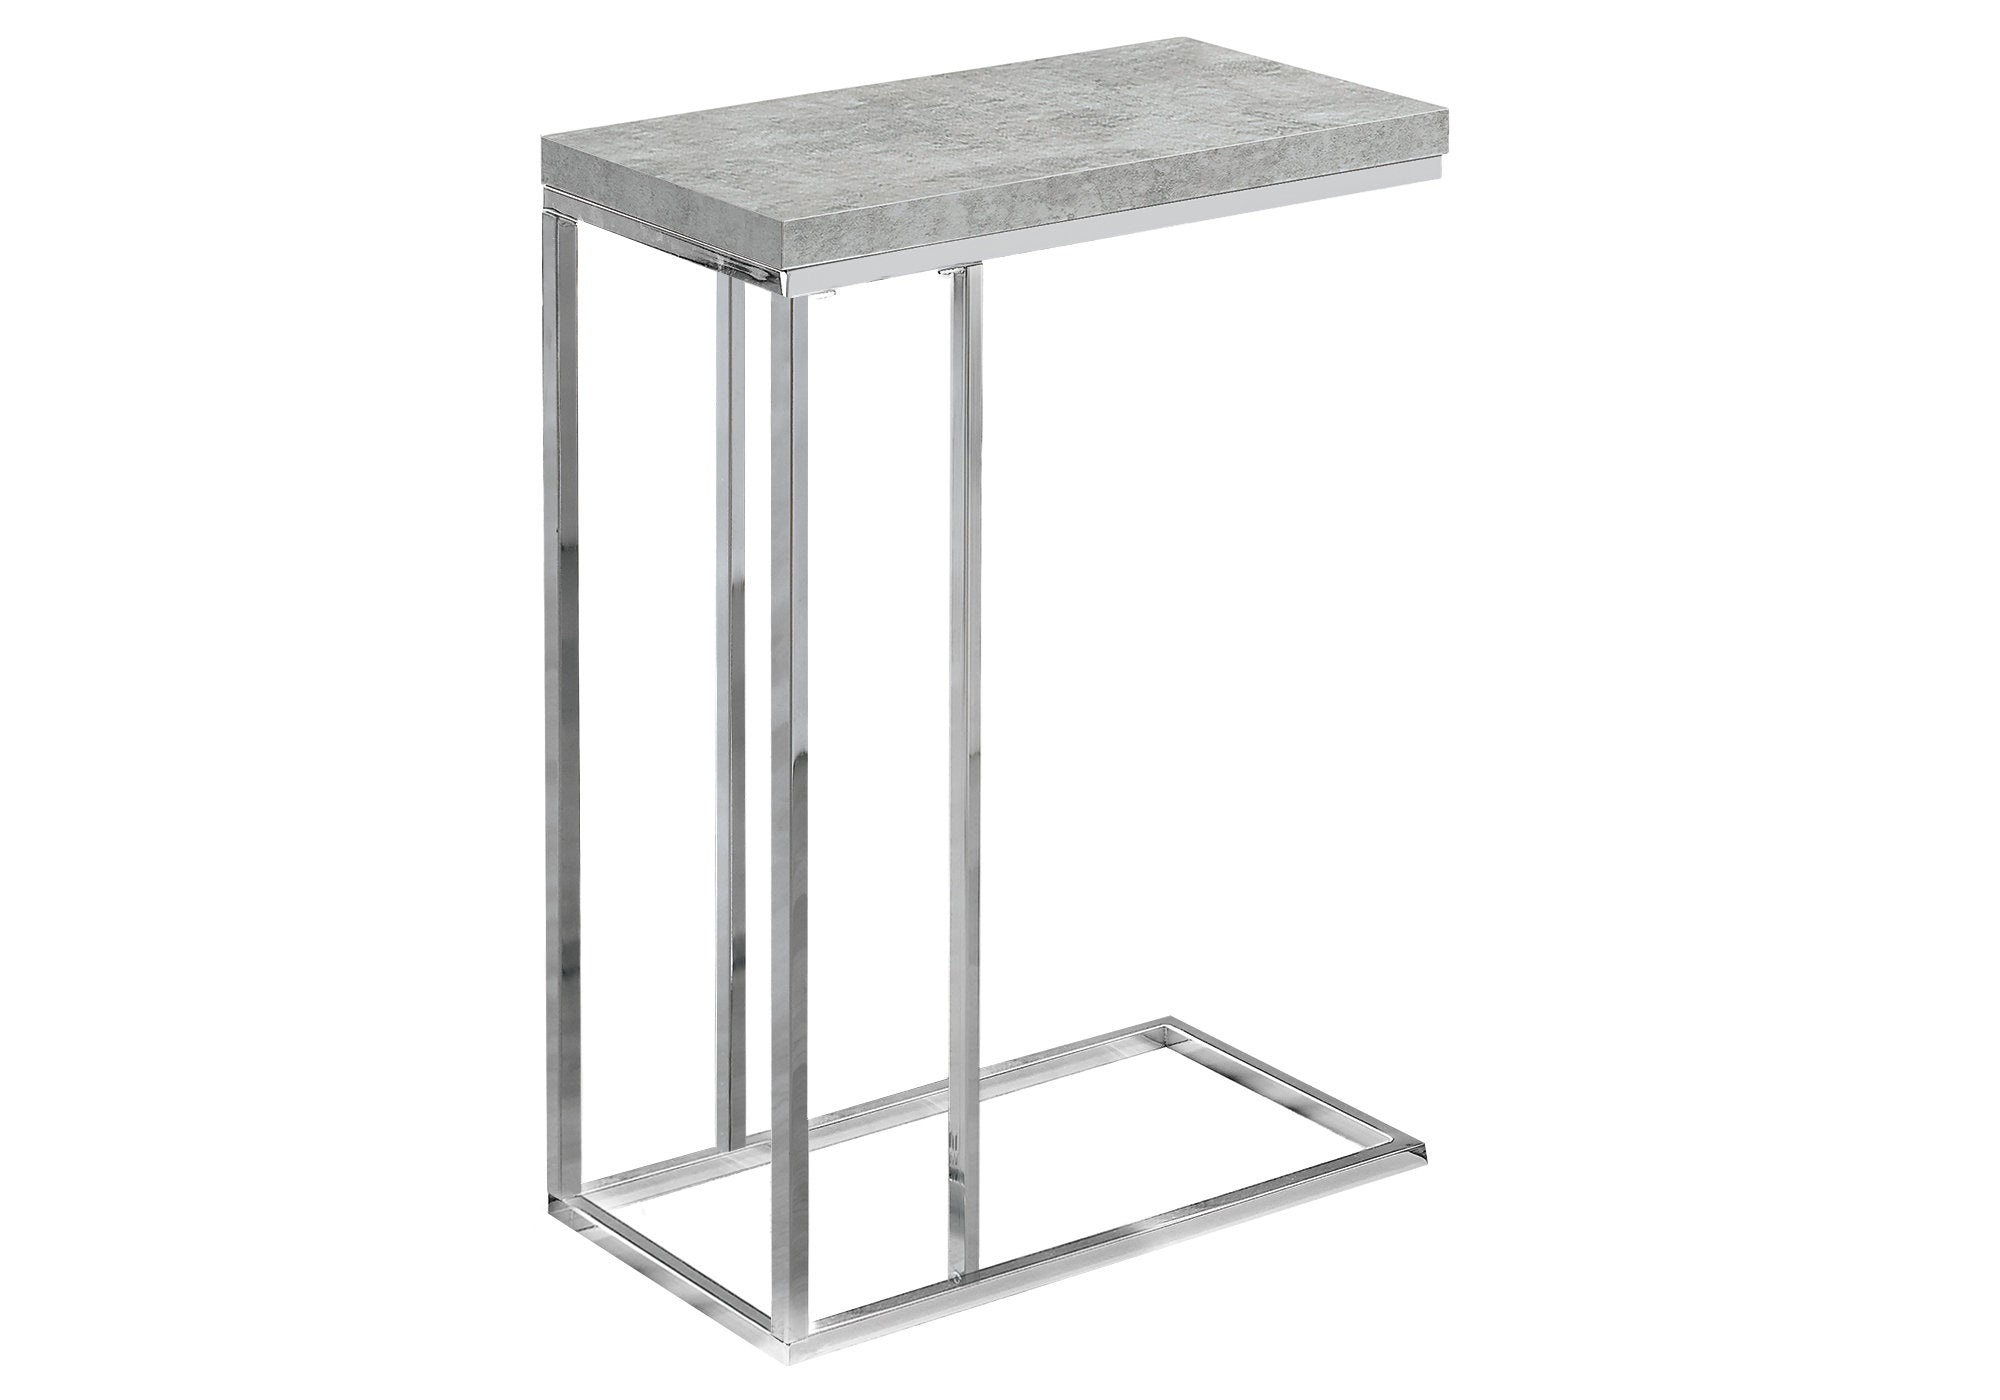 MN-363372    Accent Table, C-Shaped, End, Side, Snack, Living Room, Bedroom, Metal Legs, Laminate, Grey Cement Look, Chrome, Contemporary, Modern